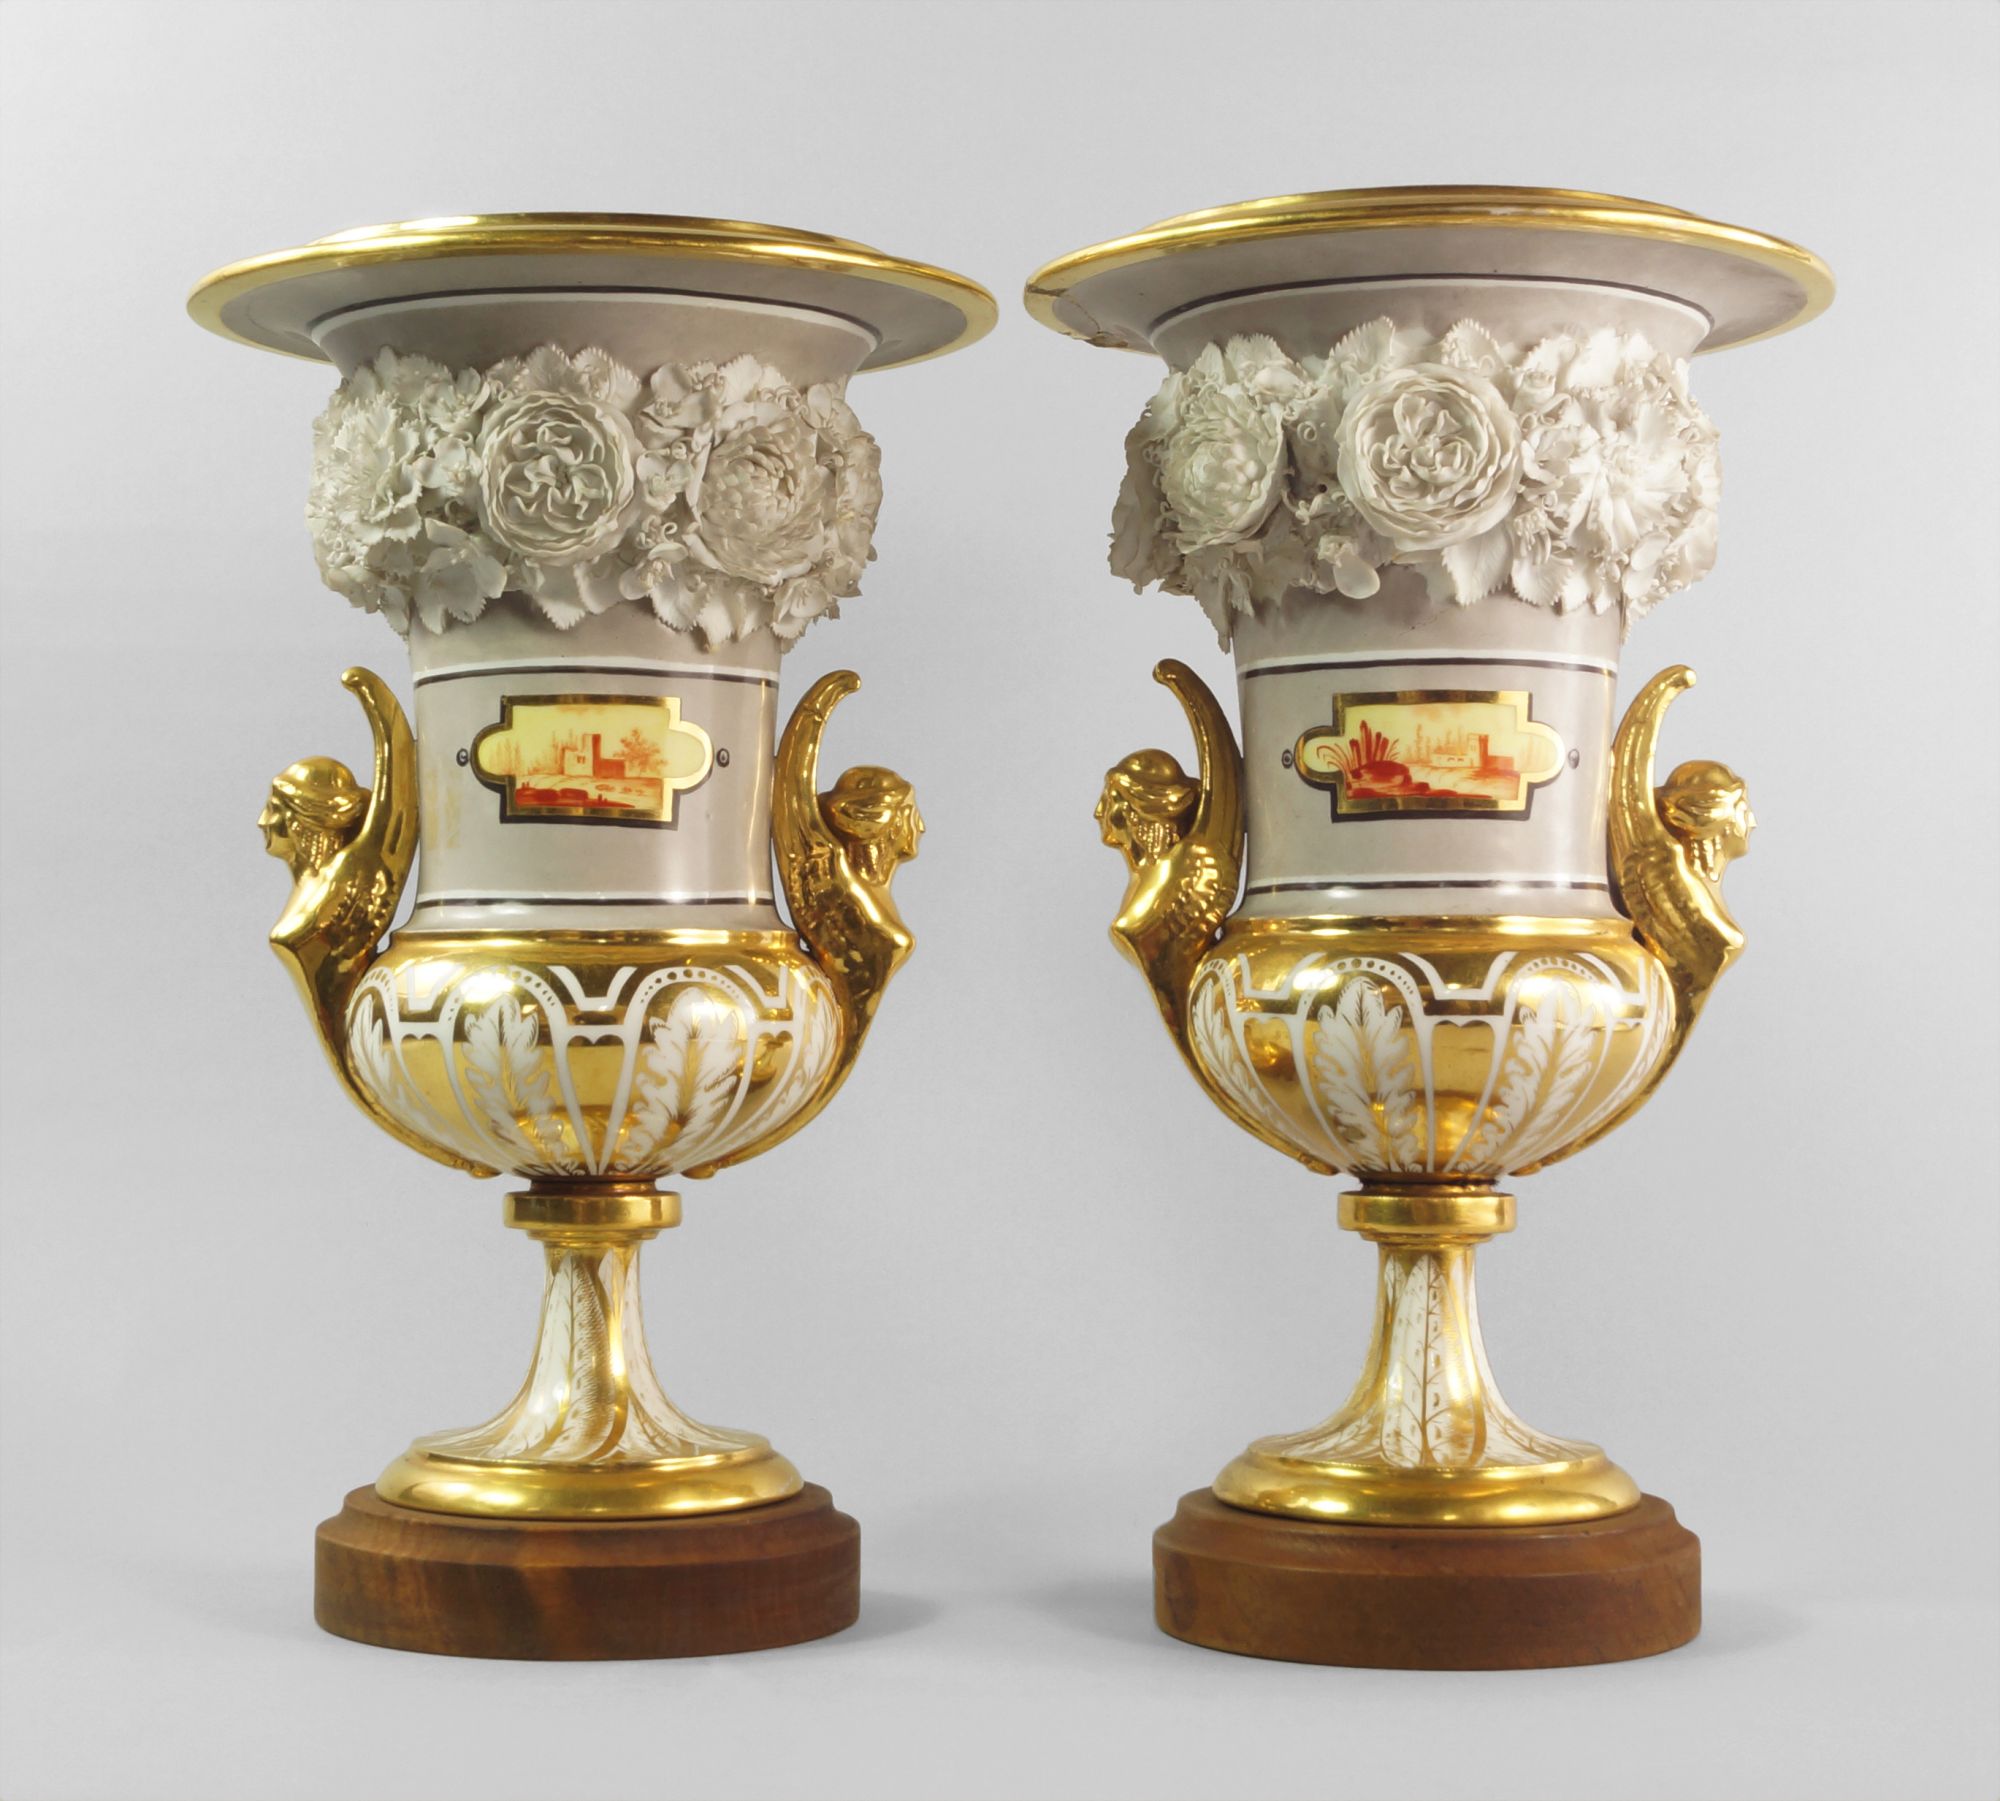 A pair of German porcelain gilt and flower encrusted floral campana urns, early 19th century,